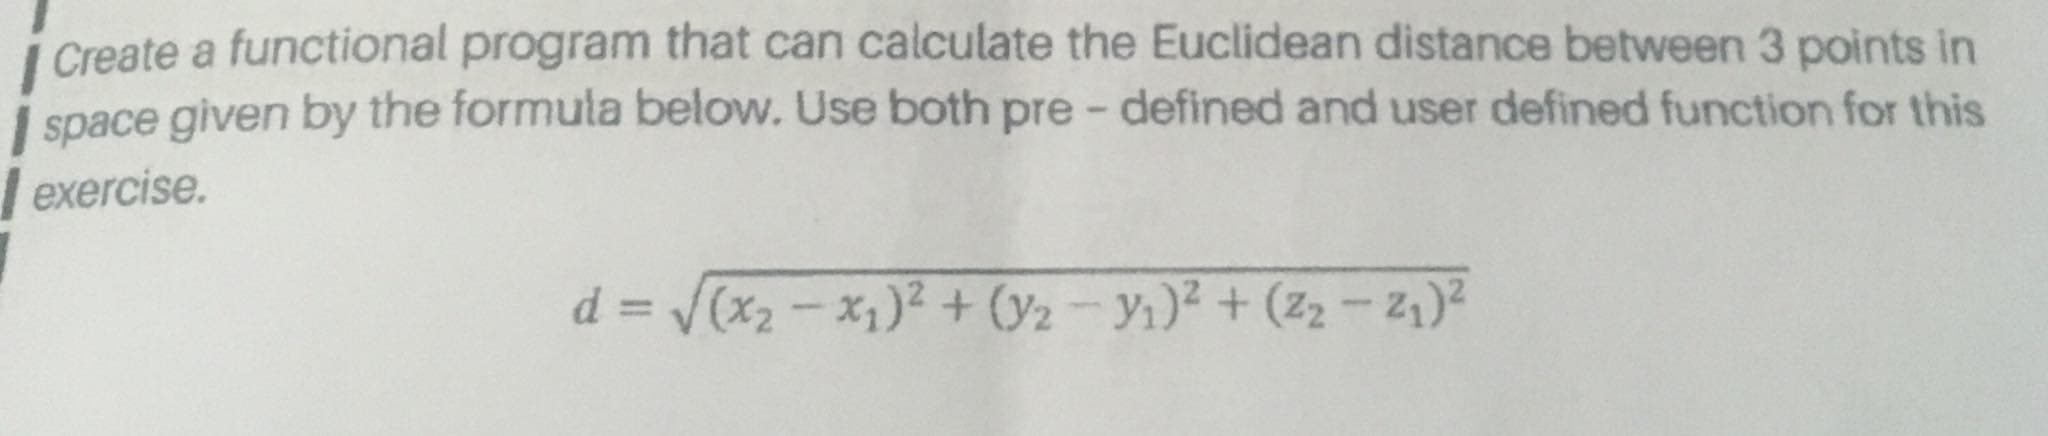 i Create a functional program that can calculate the Euclidean distance between 3 points in
space given by the formula below. Use both pre - defined and user defined function for this
exercise.
d = (x2- x,)² + ()2 – Yı)² + (z2 - 2,)?
